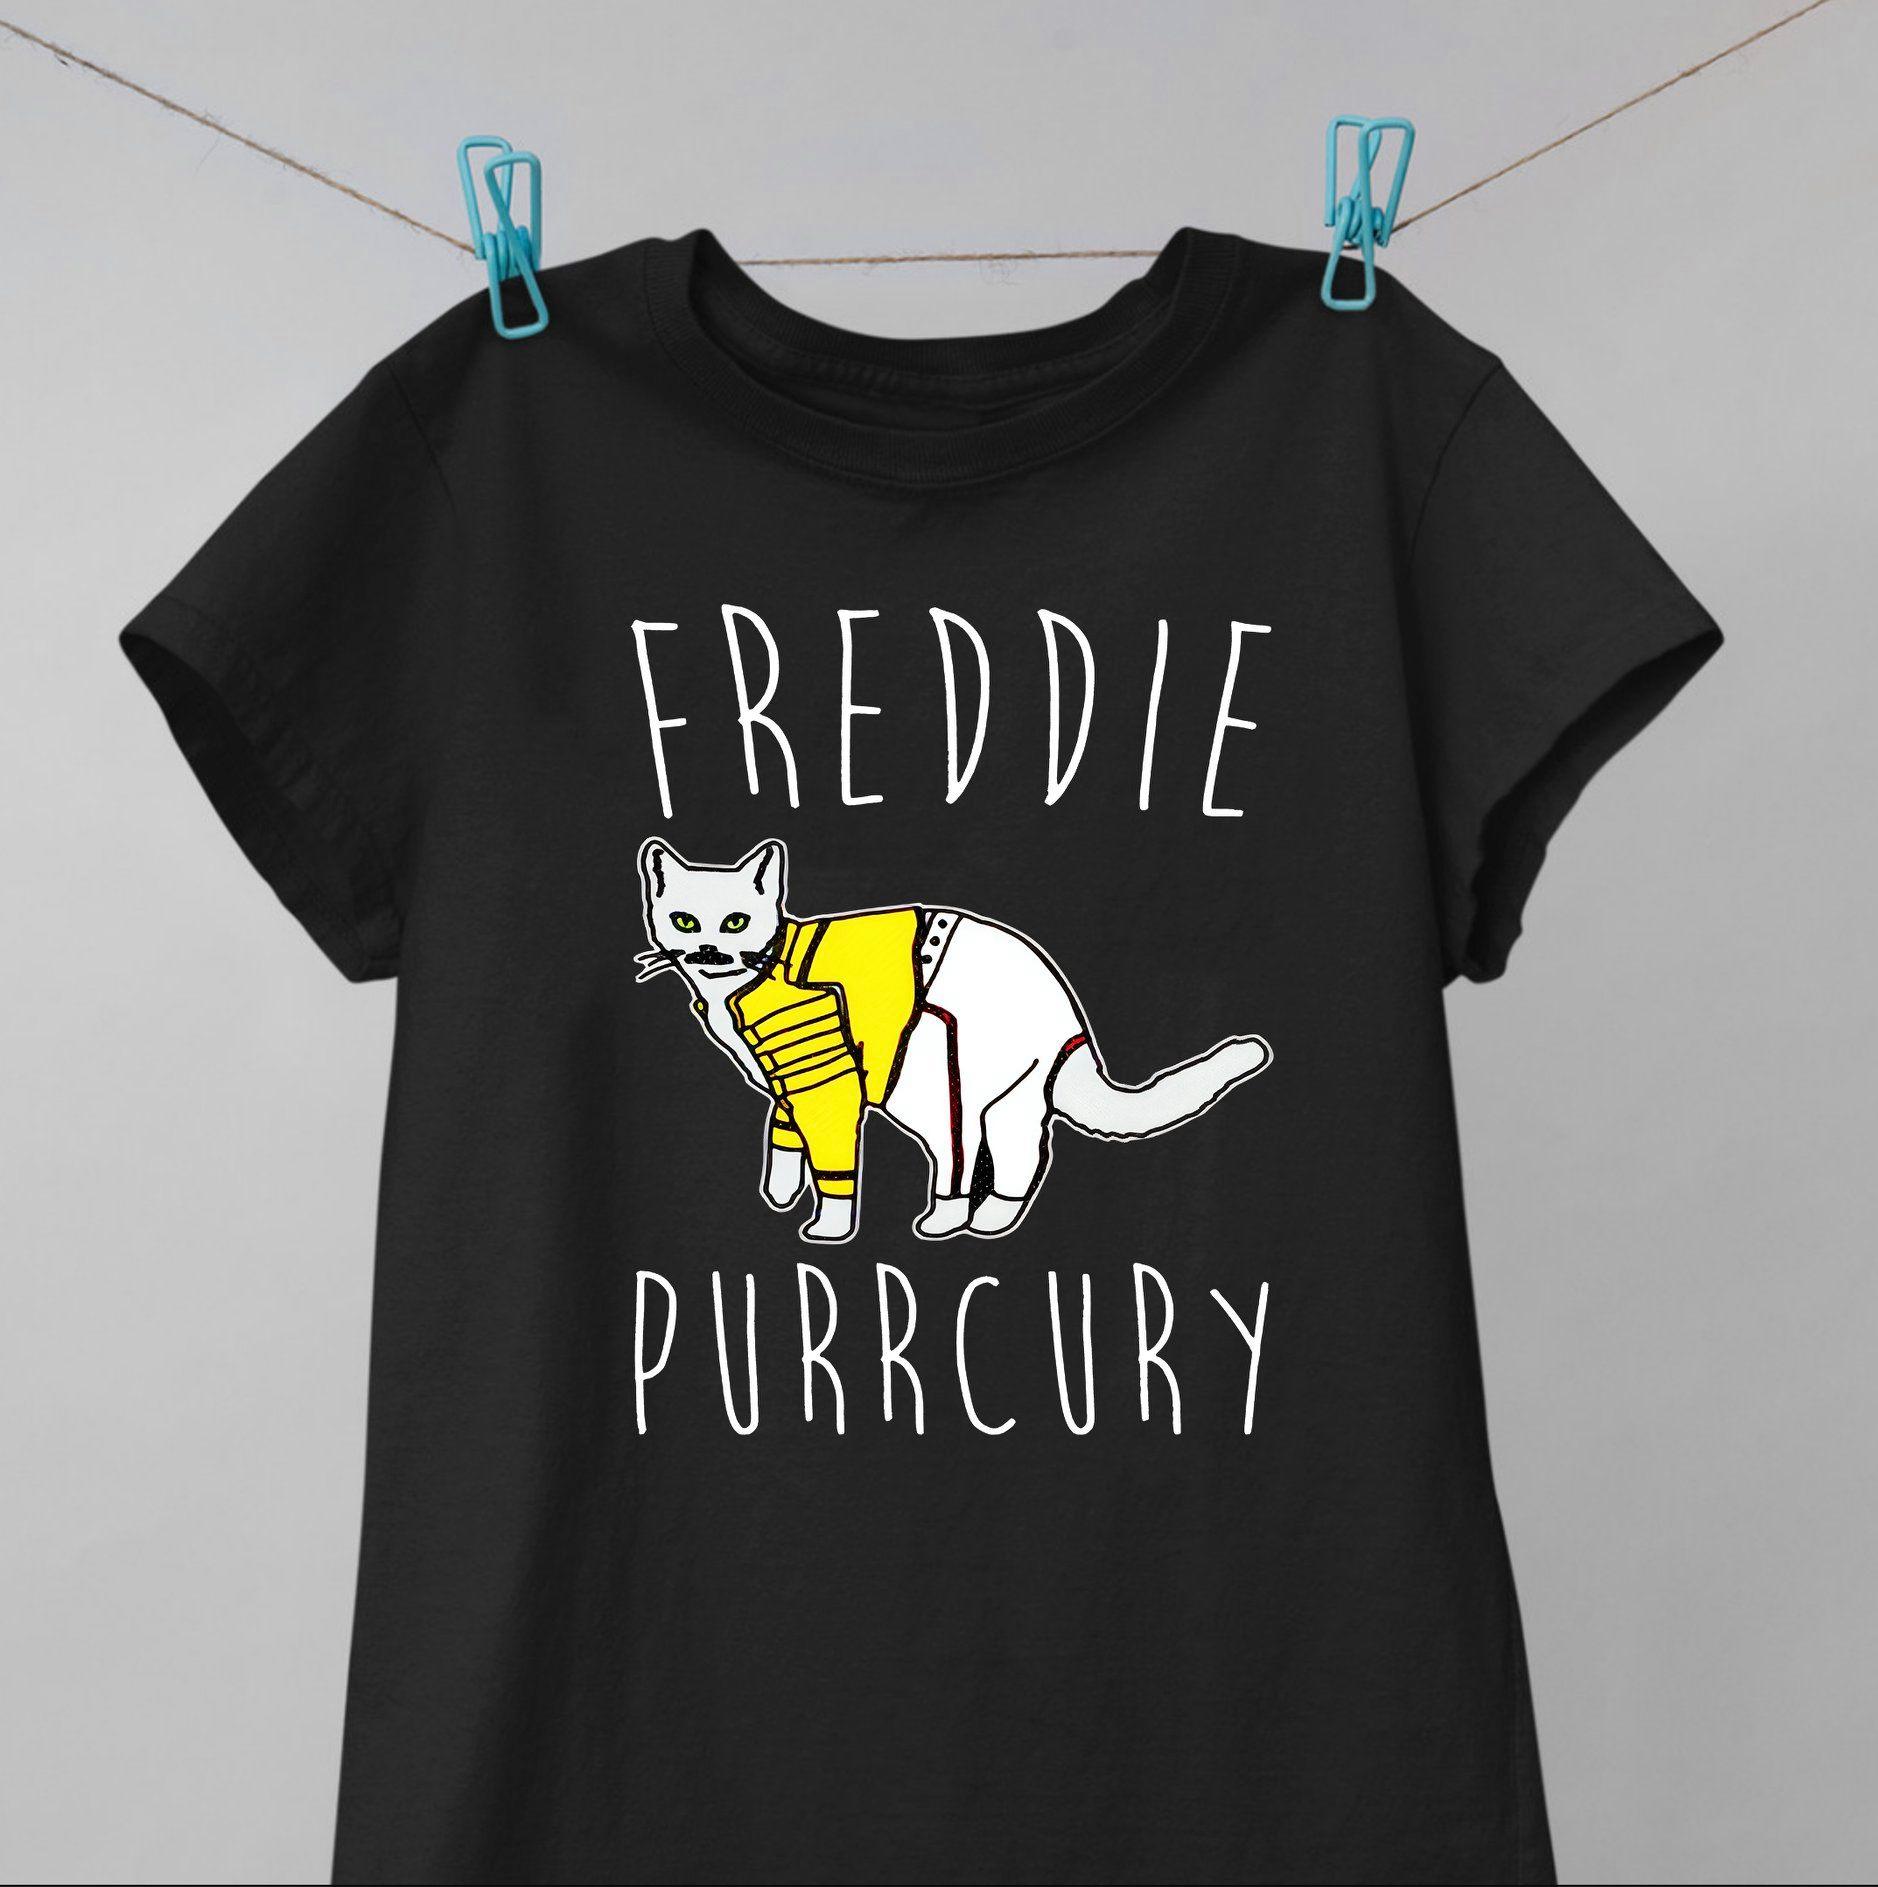 Freddie Purrcury - Cat parody T-shirt, gift for cat lover